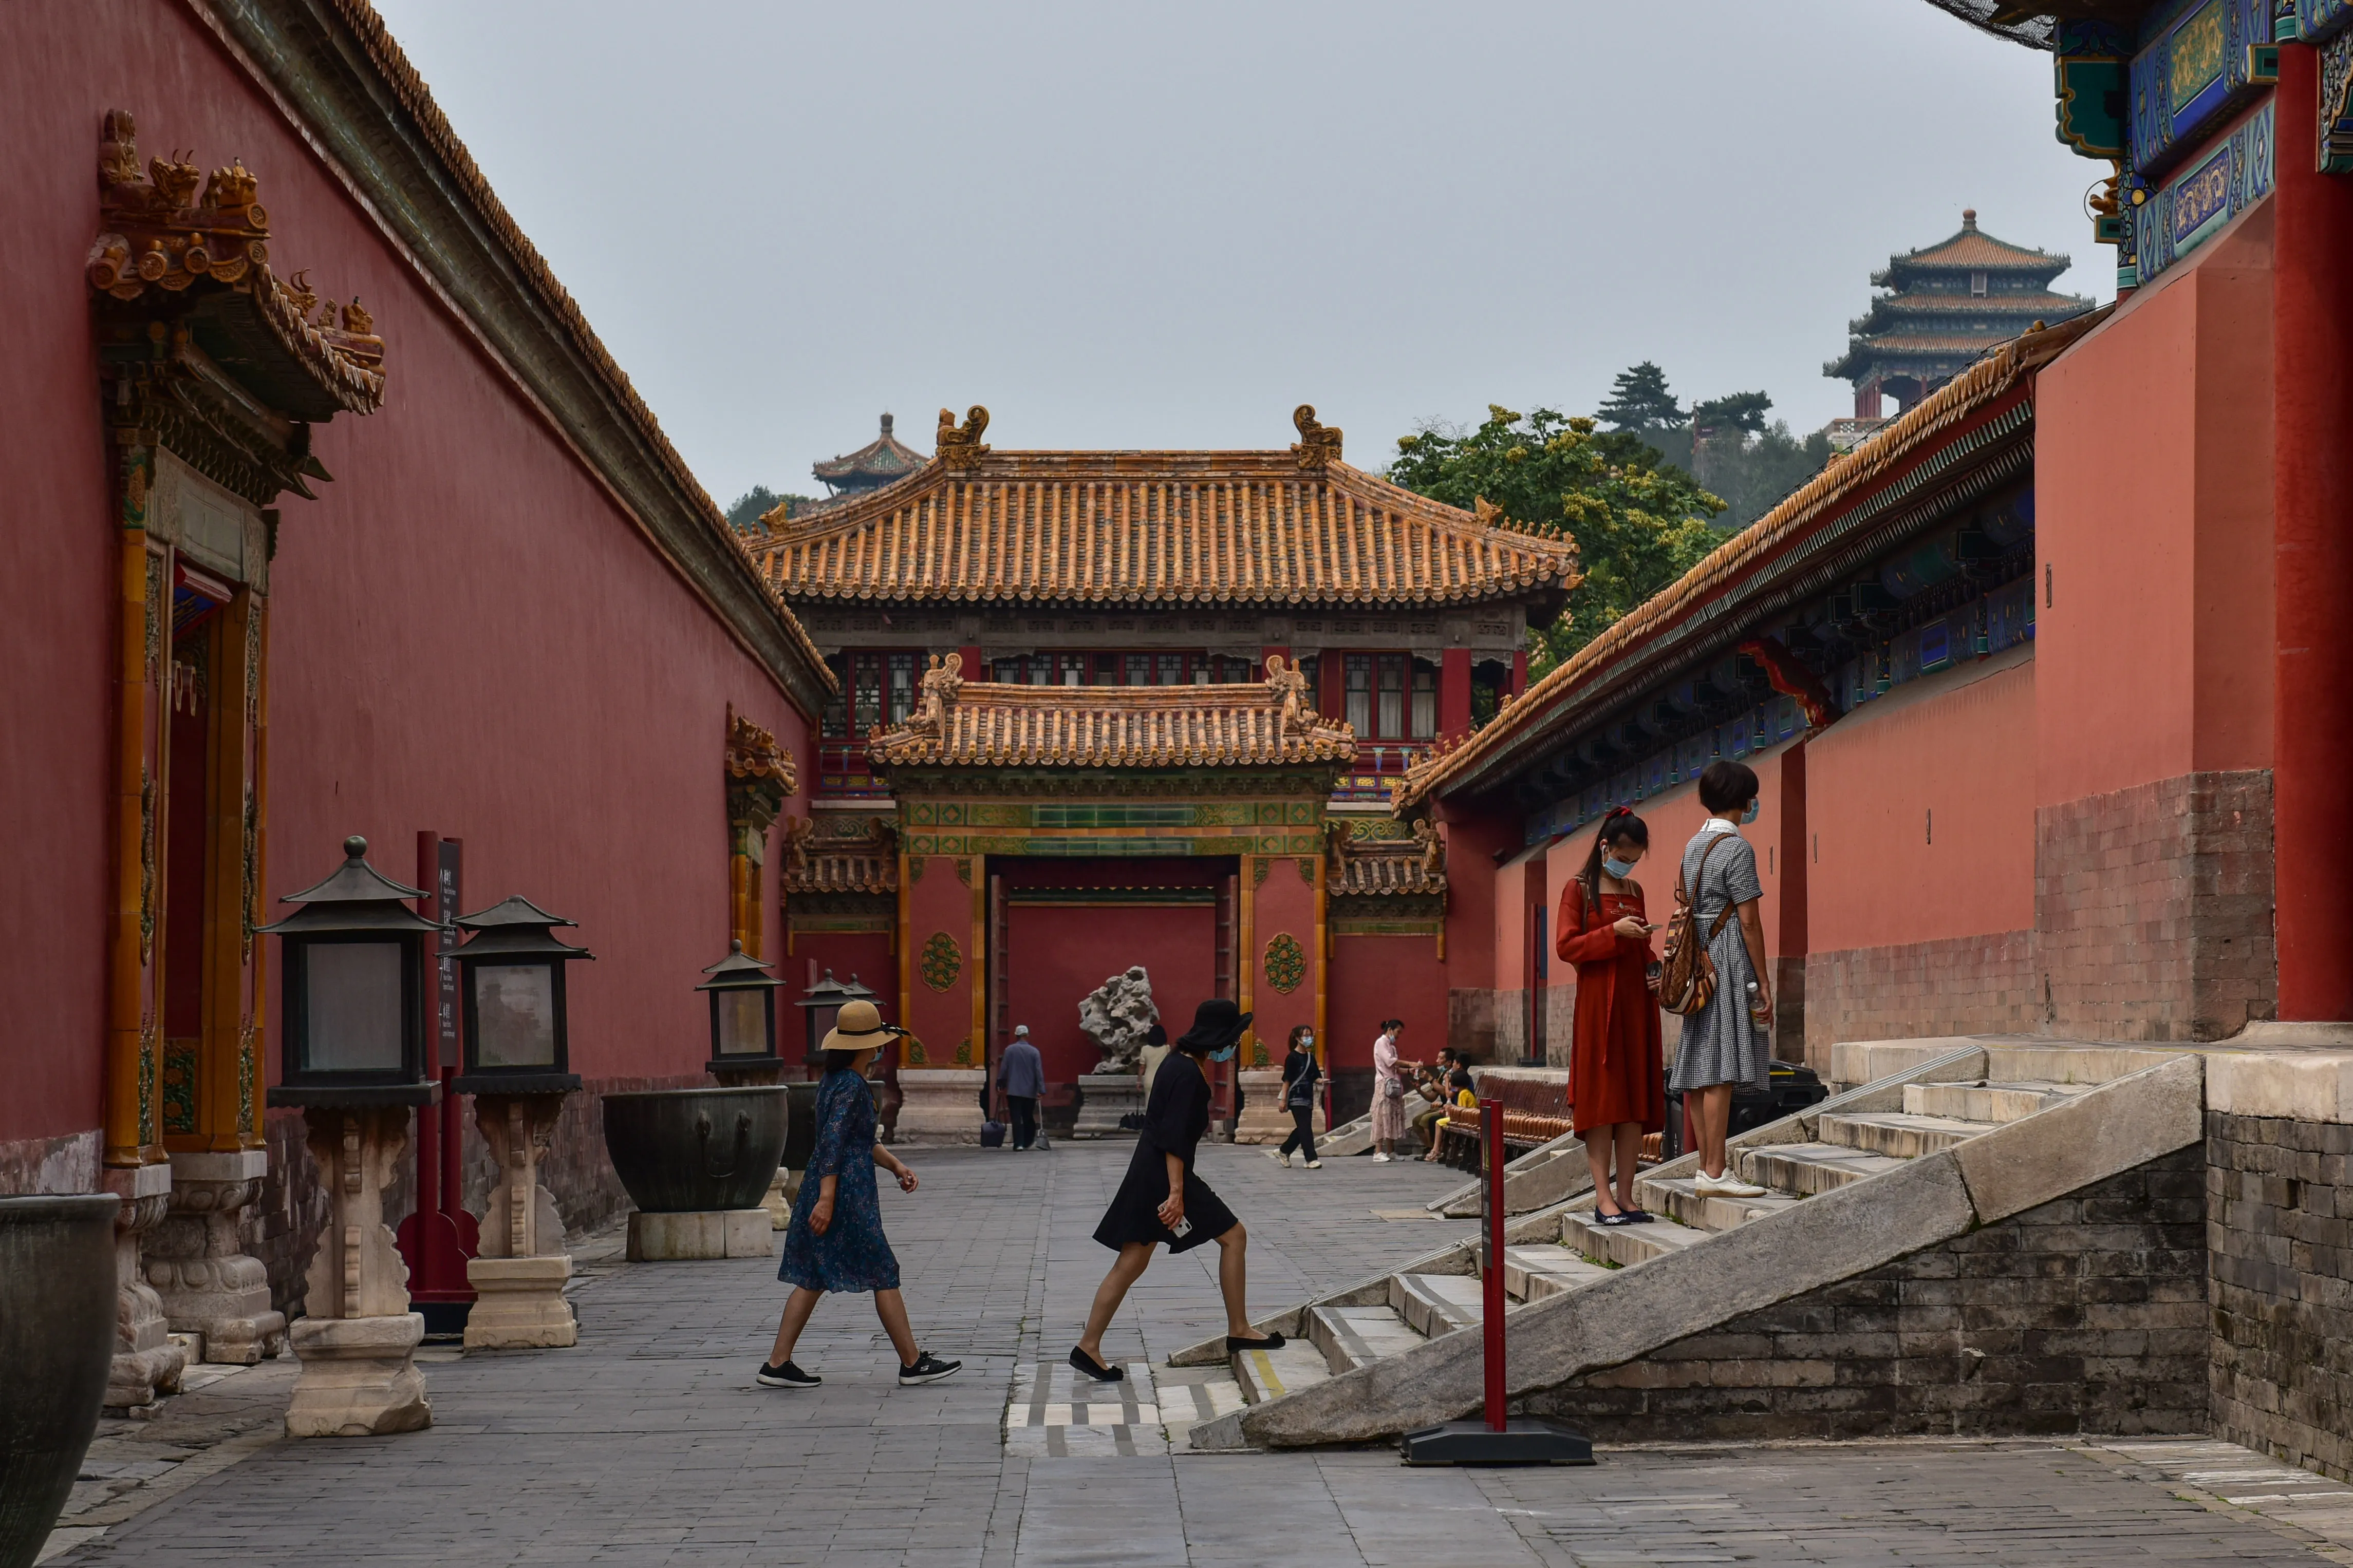 How did the Forbidden City Become a Public Museum?